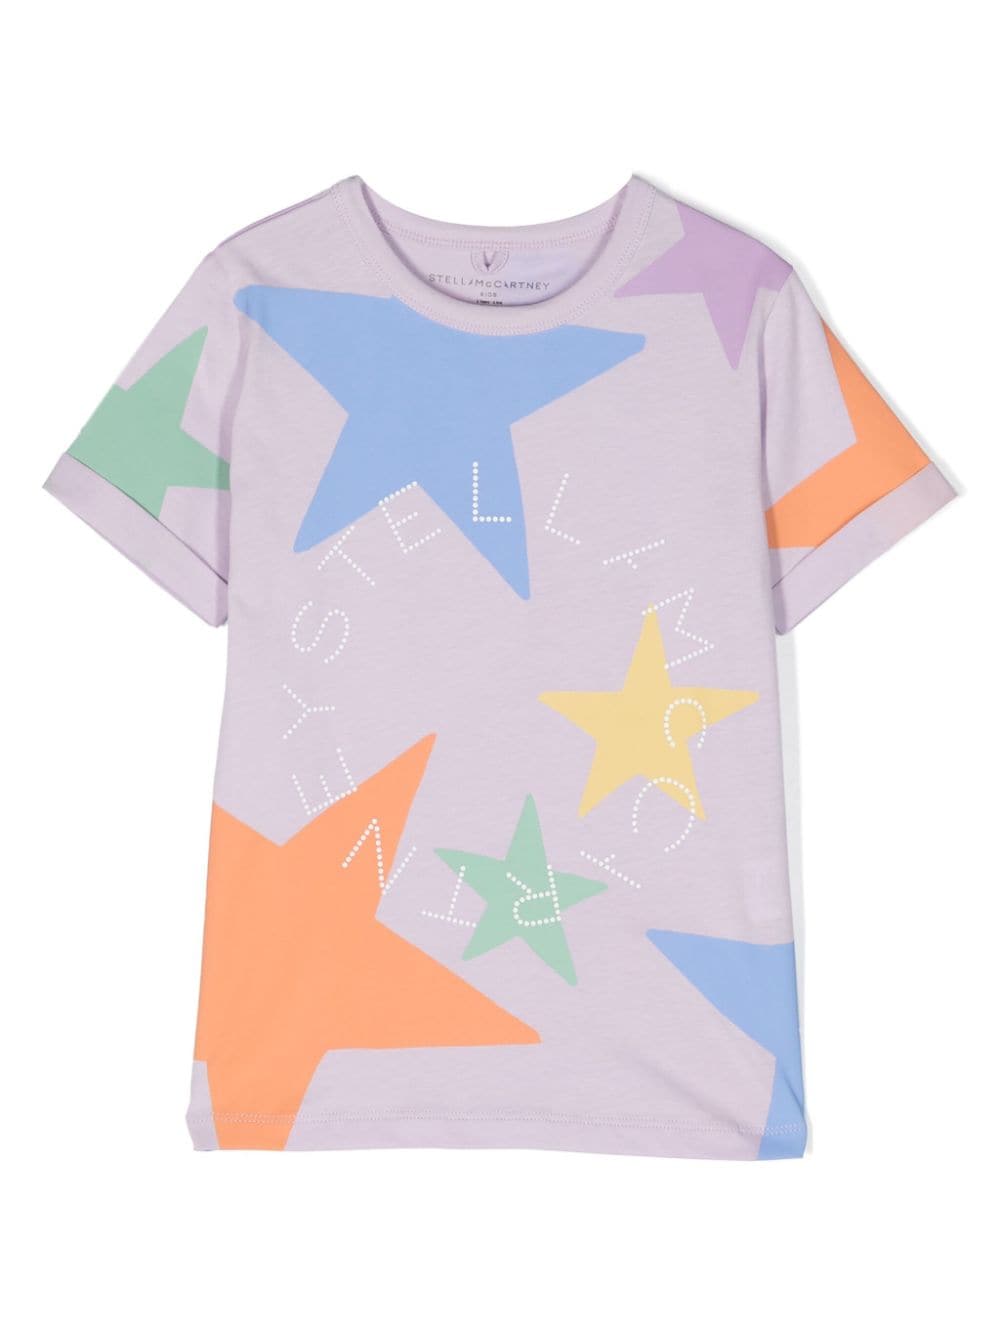 Lila t-shirt for girls with all-over stars